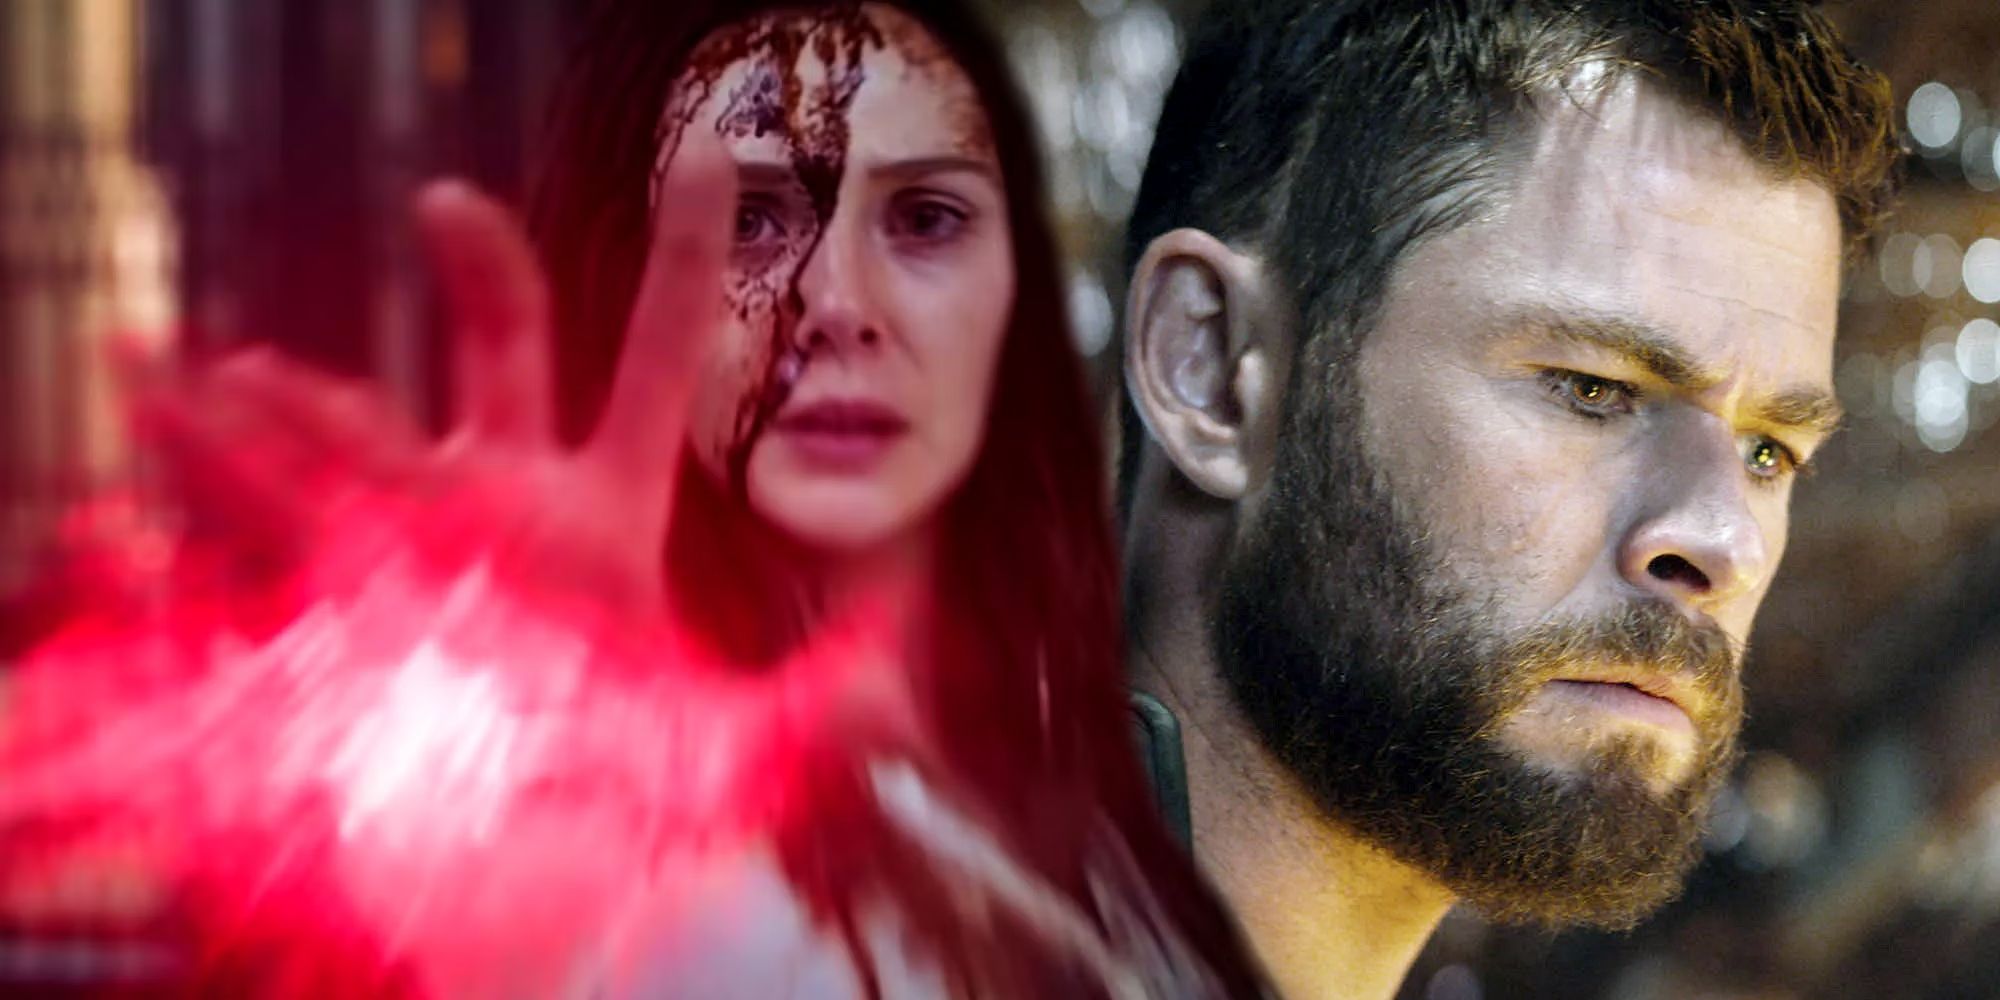 Scarlet Witch uses her powers; Thor glowers into the distance